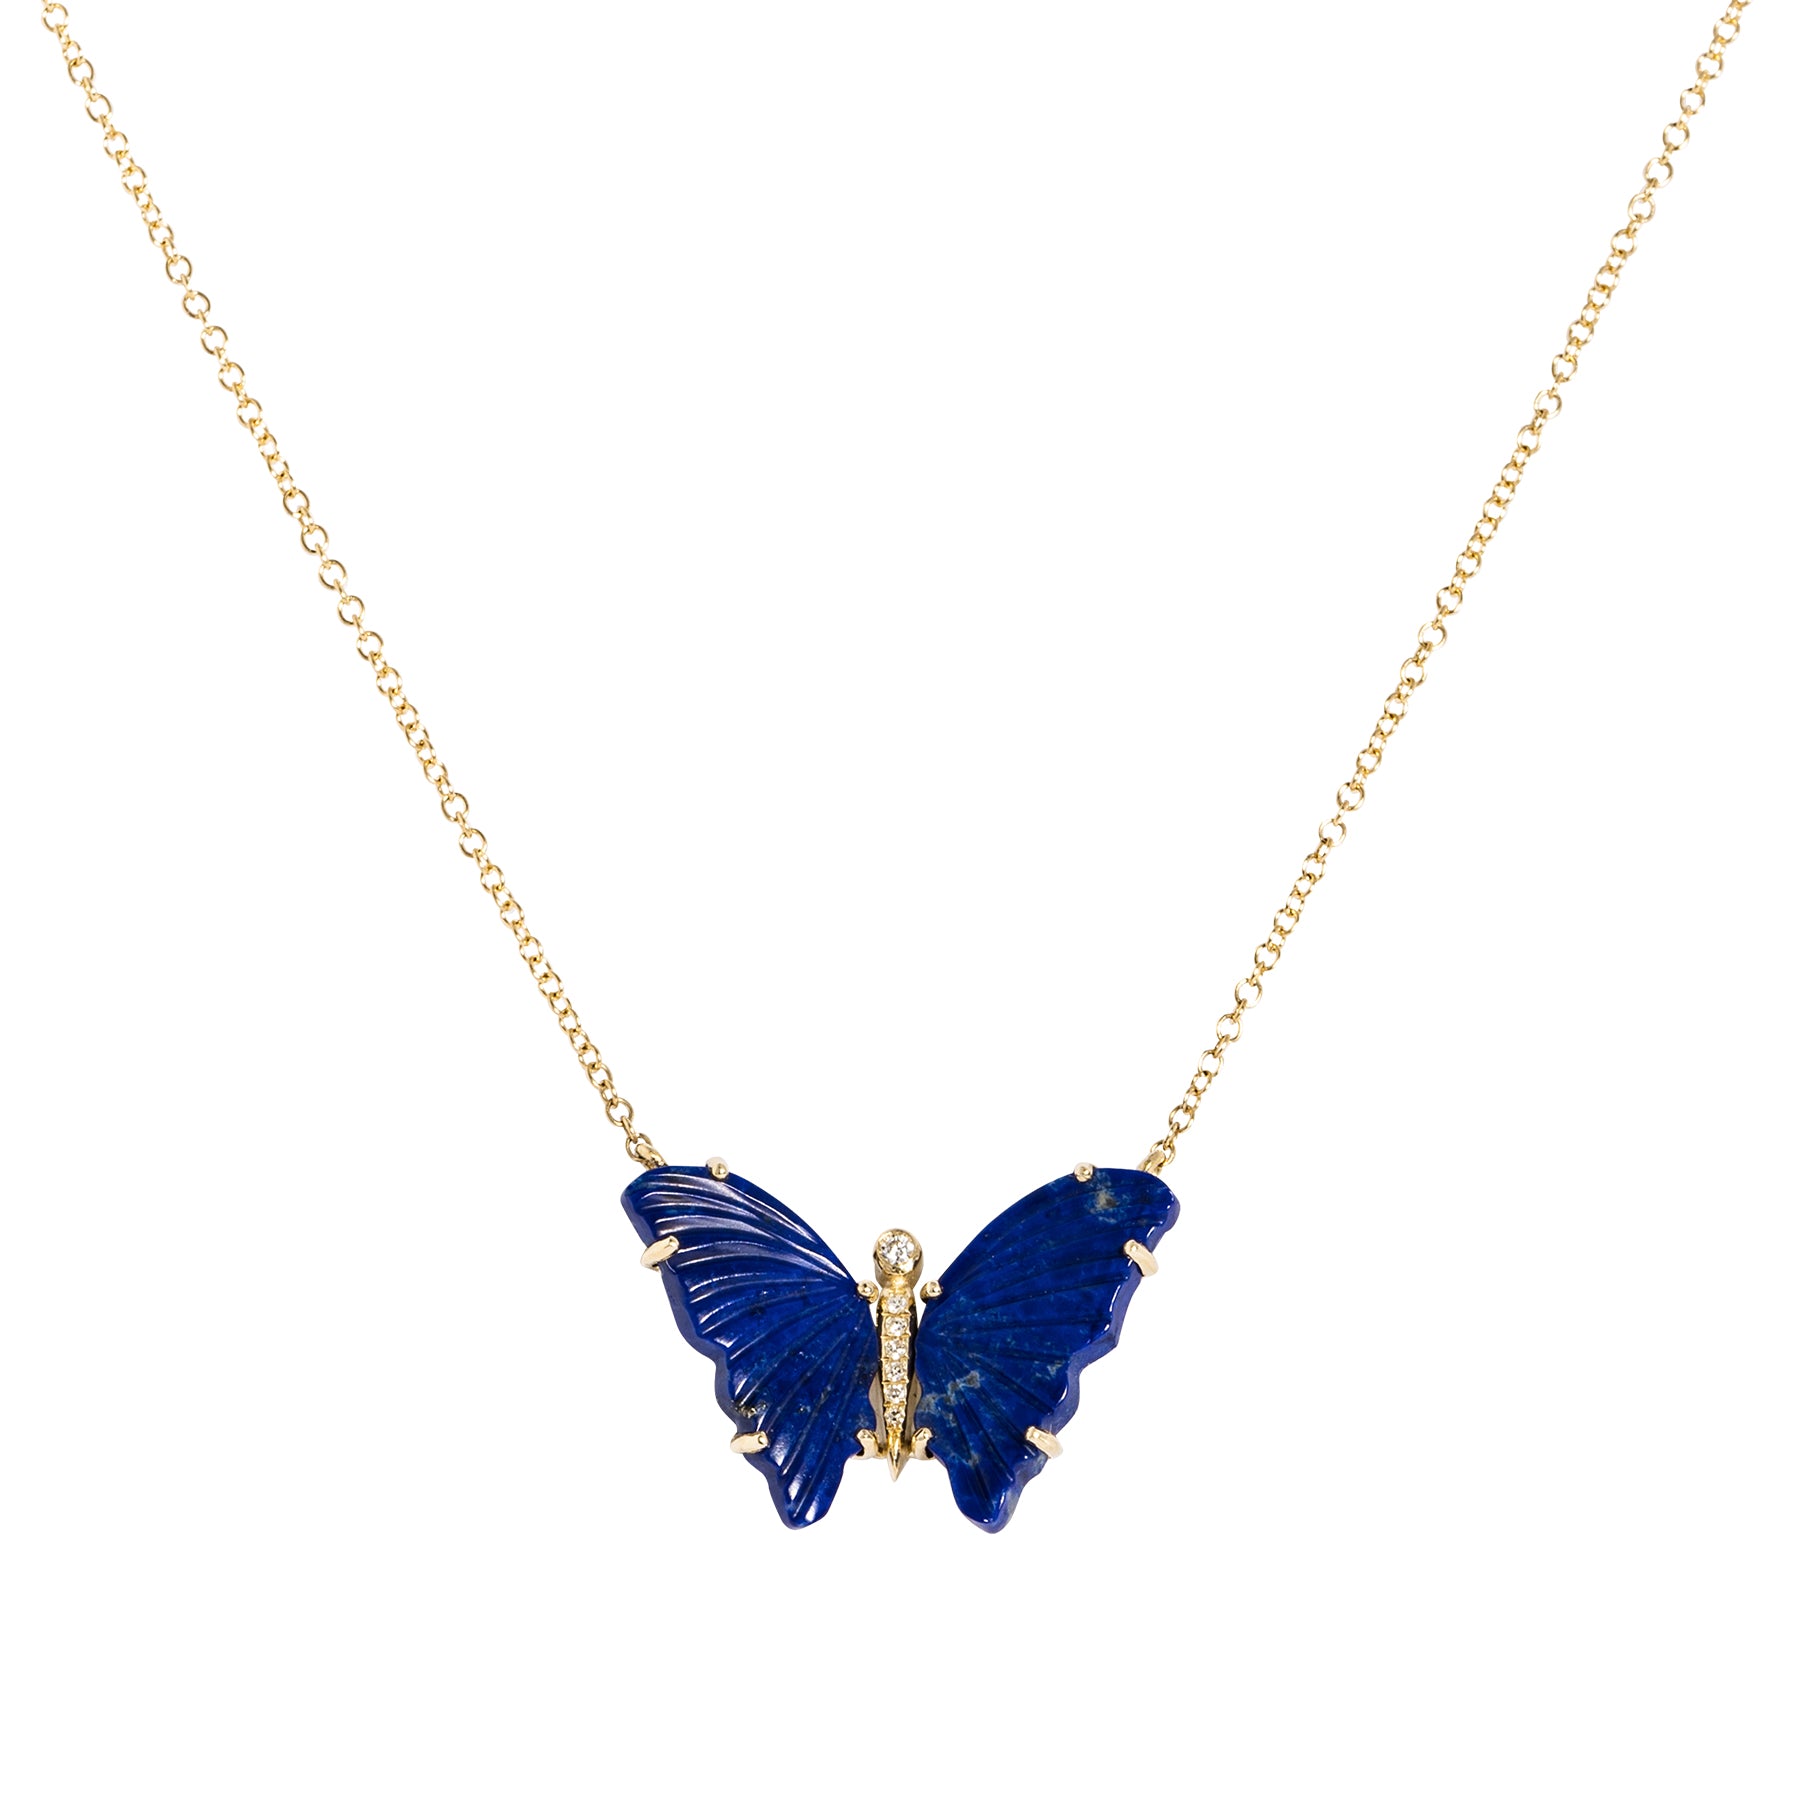 Lapis Butterfly Necklace - Nina Segal Jewelry